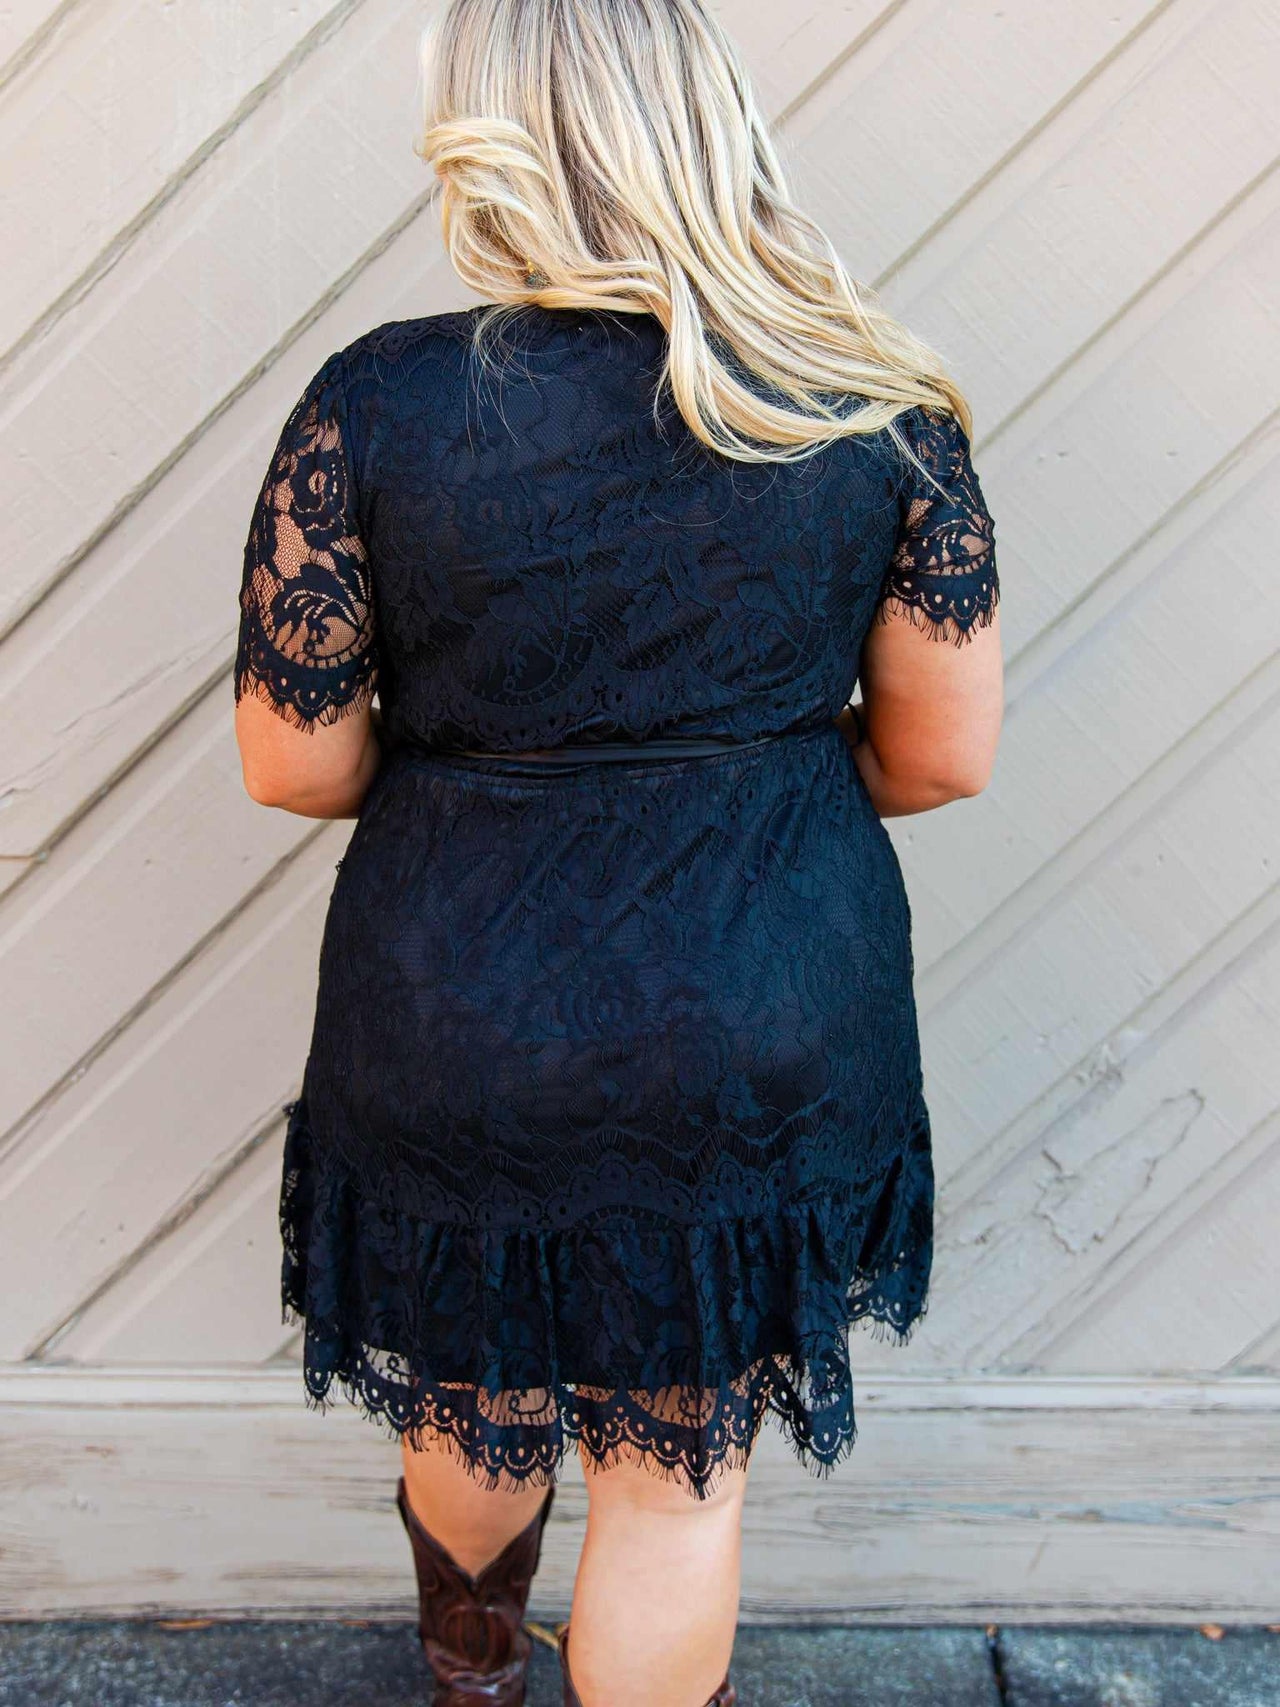 Wrapped Up In Your Arms Lace Dress - Black-Dresses-Southern Fried Chics